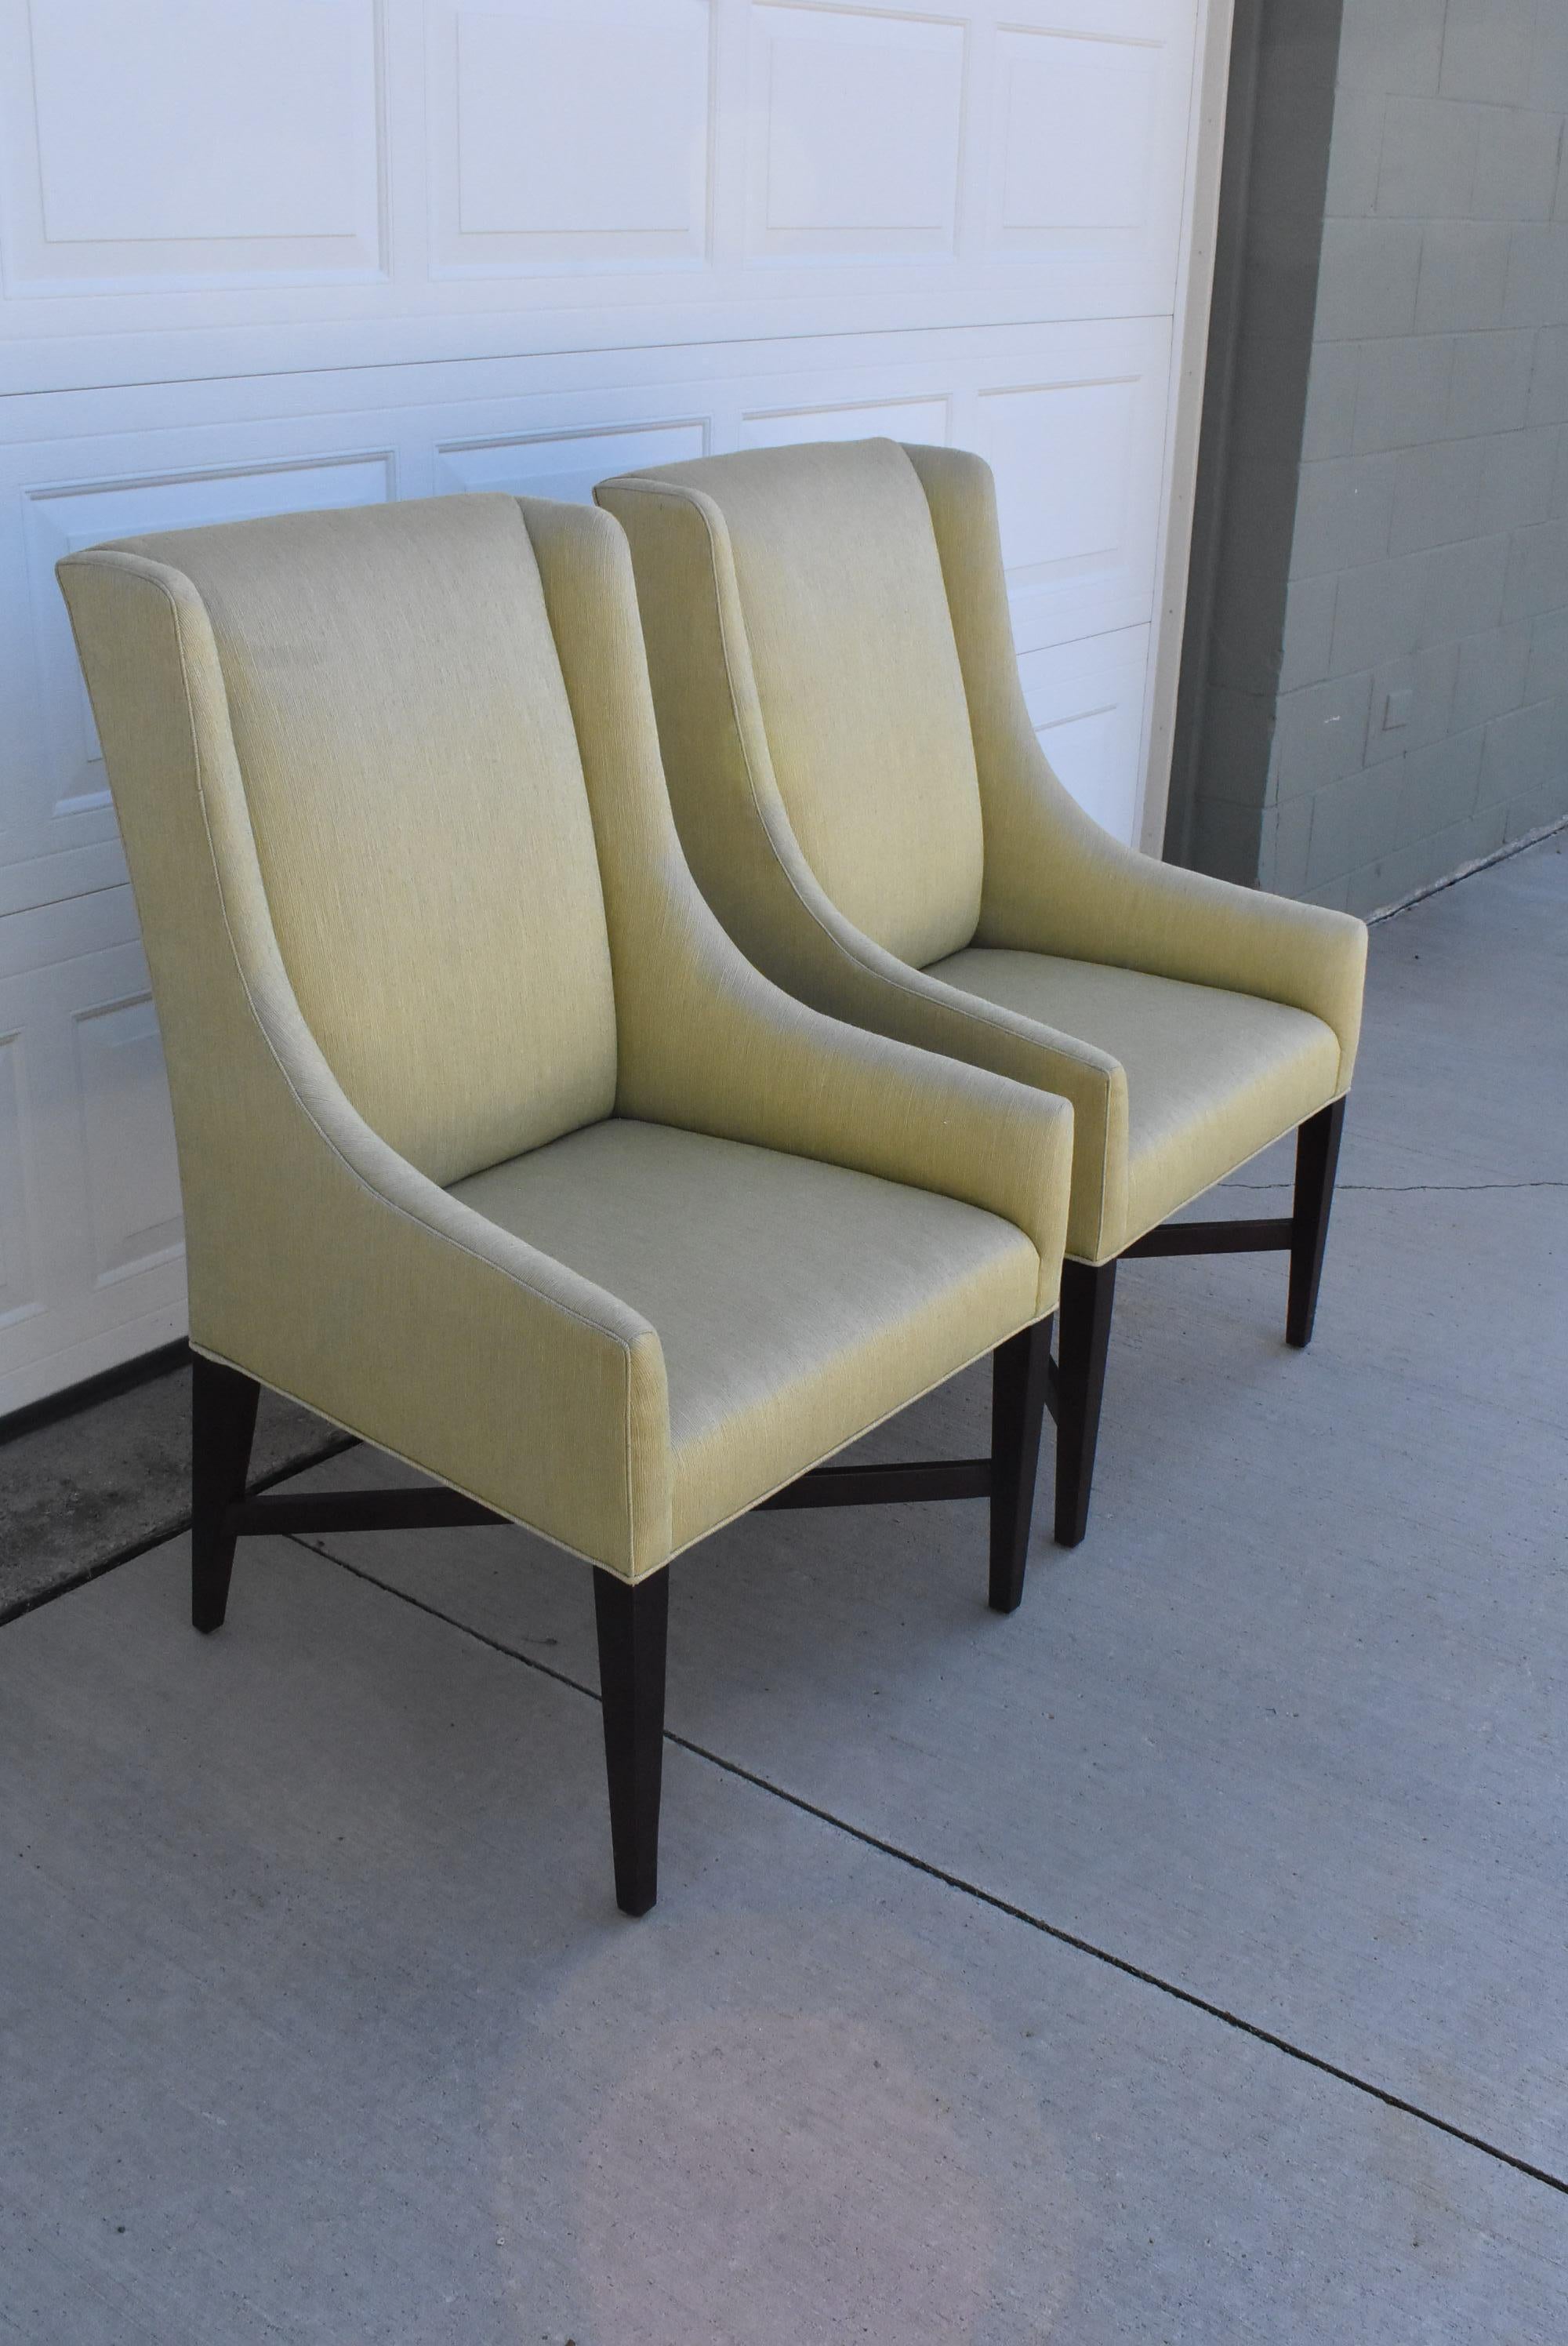 Pair of captain dining side chairs by Swaim. Straited light lemon lime upholstery. Espresso finished tapered legs and stretcher bars.